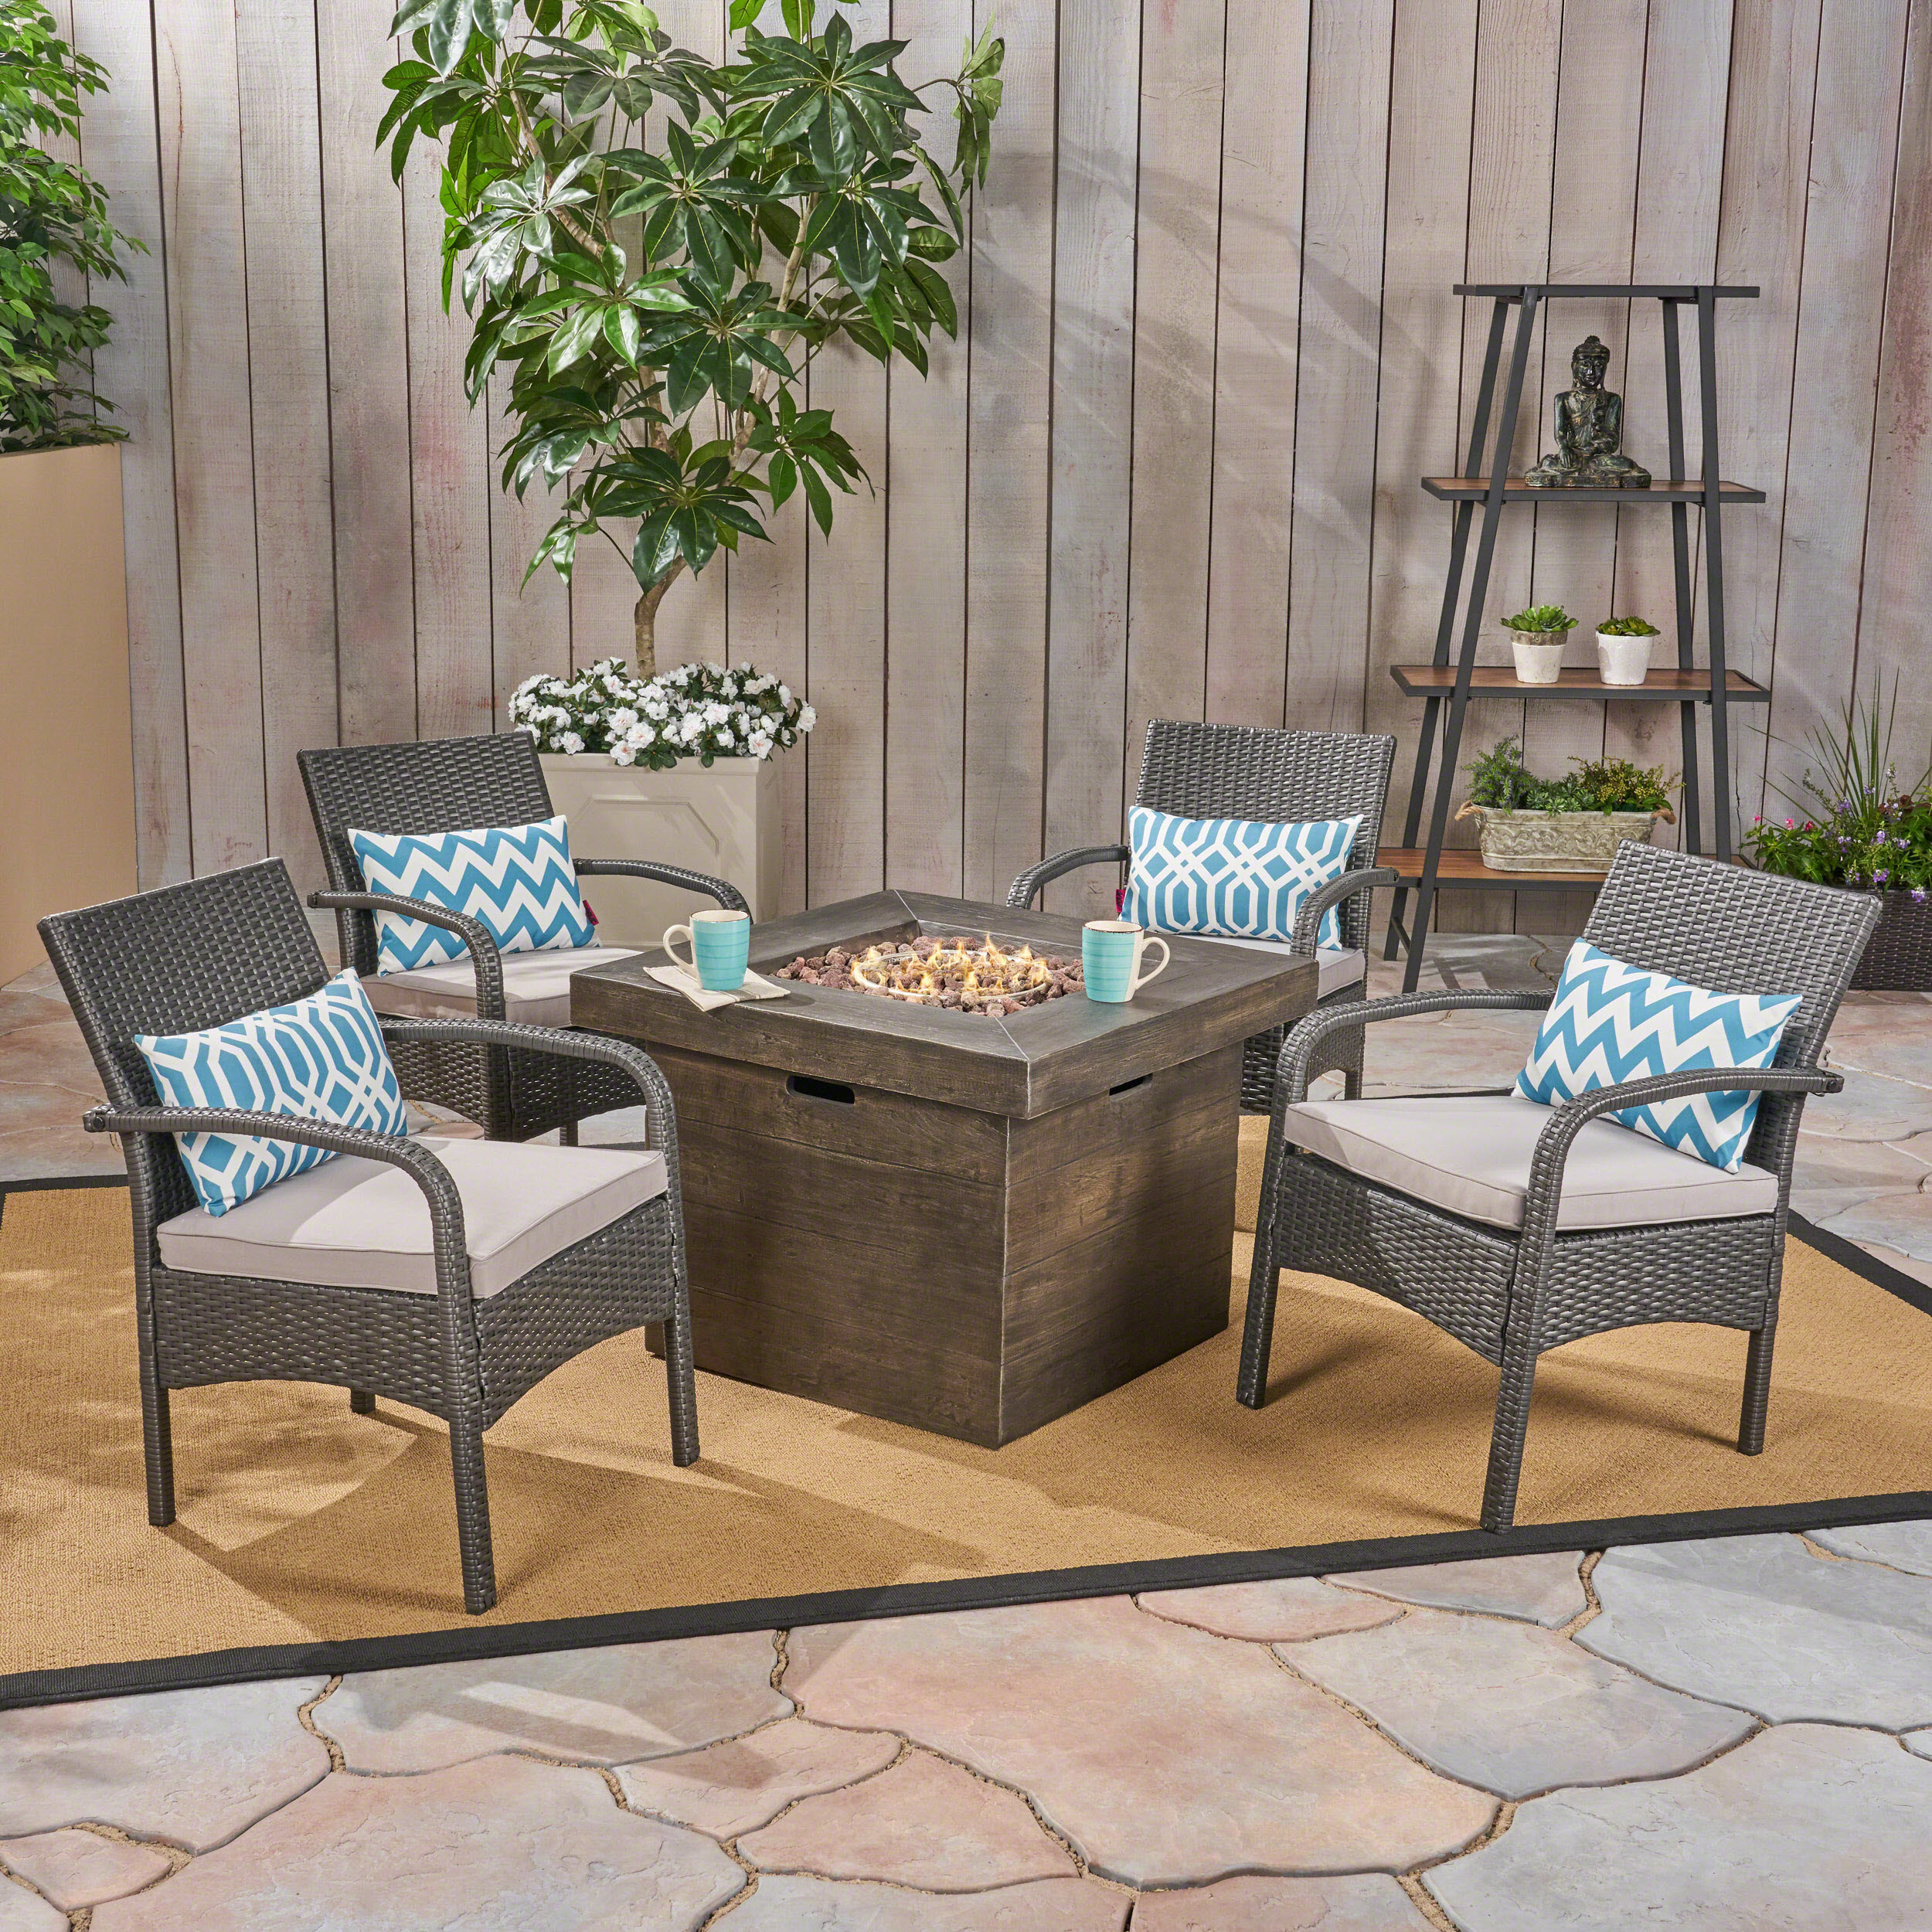 Capitan Outdoor 5 Piece Wicker Chat Set with Wood Finished Fire Pit, Gray, Silver, Gray - image 1 of 8